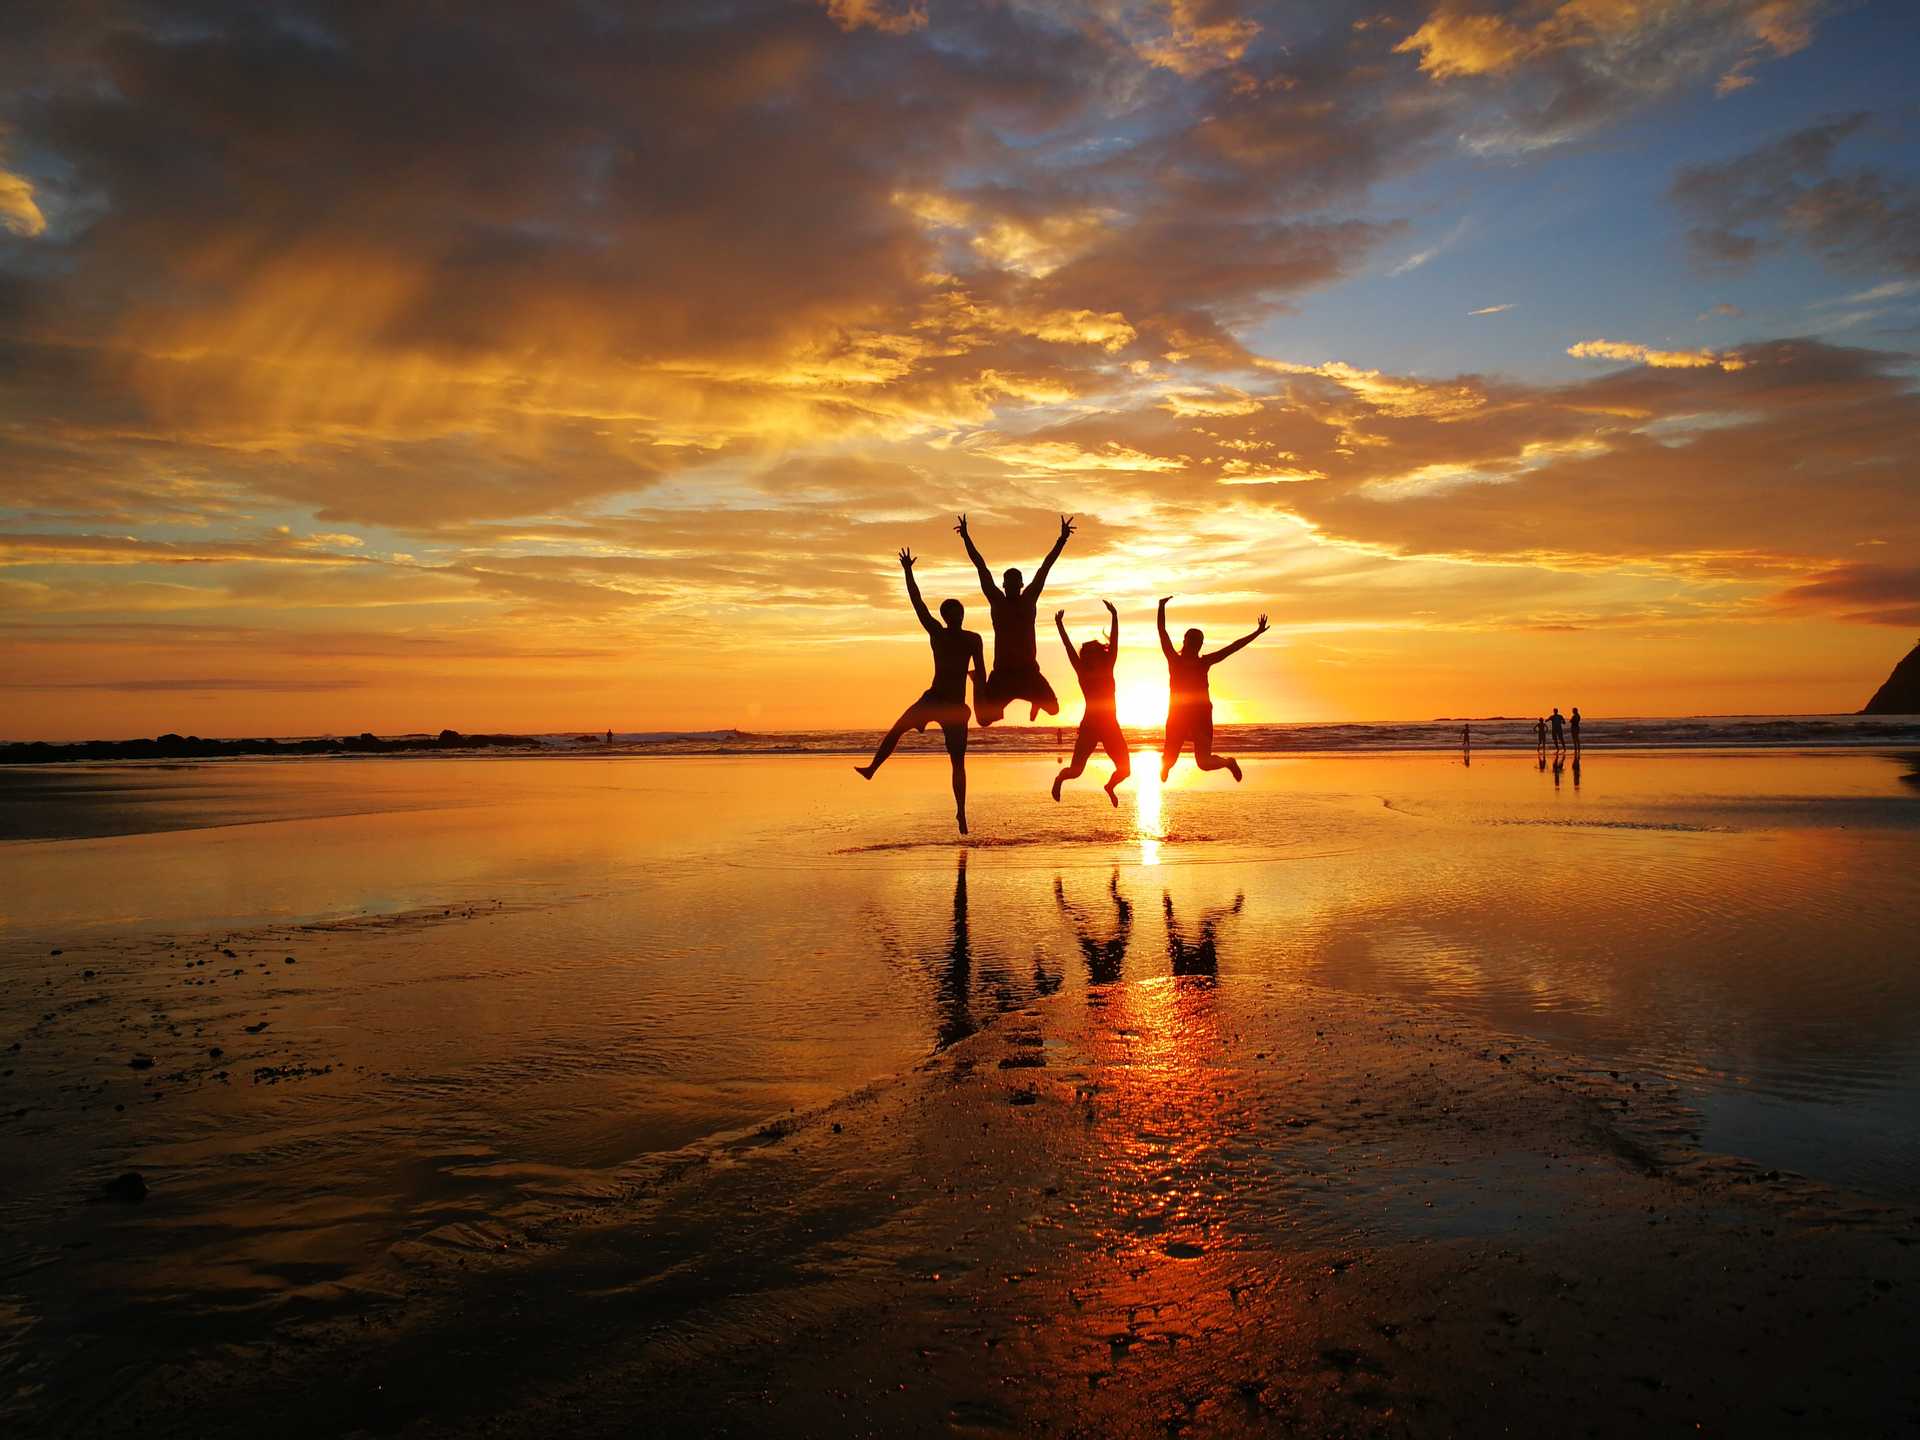 A group of people having fun at the beach at sunset